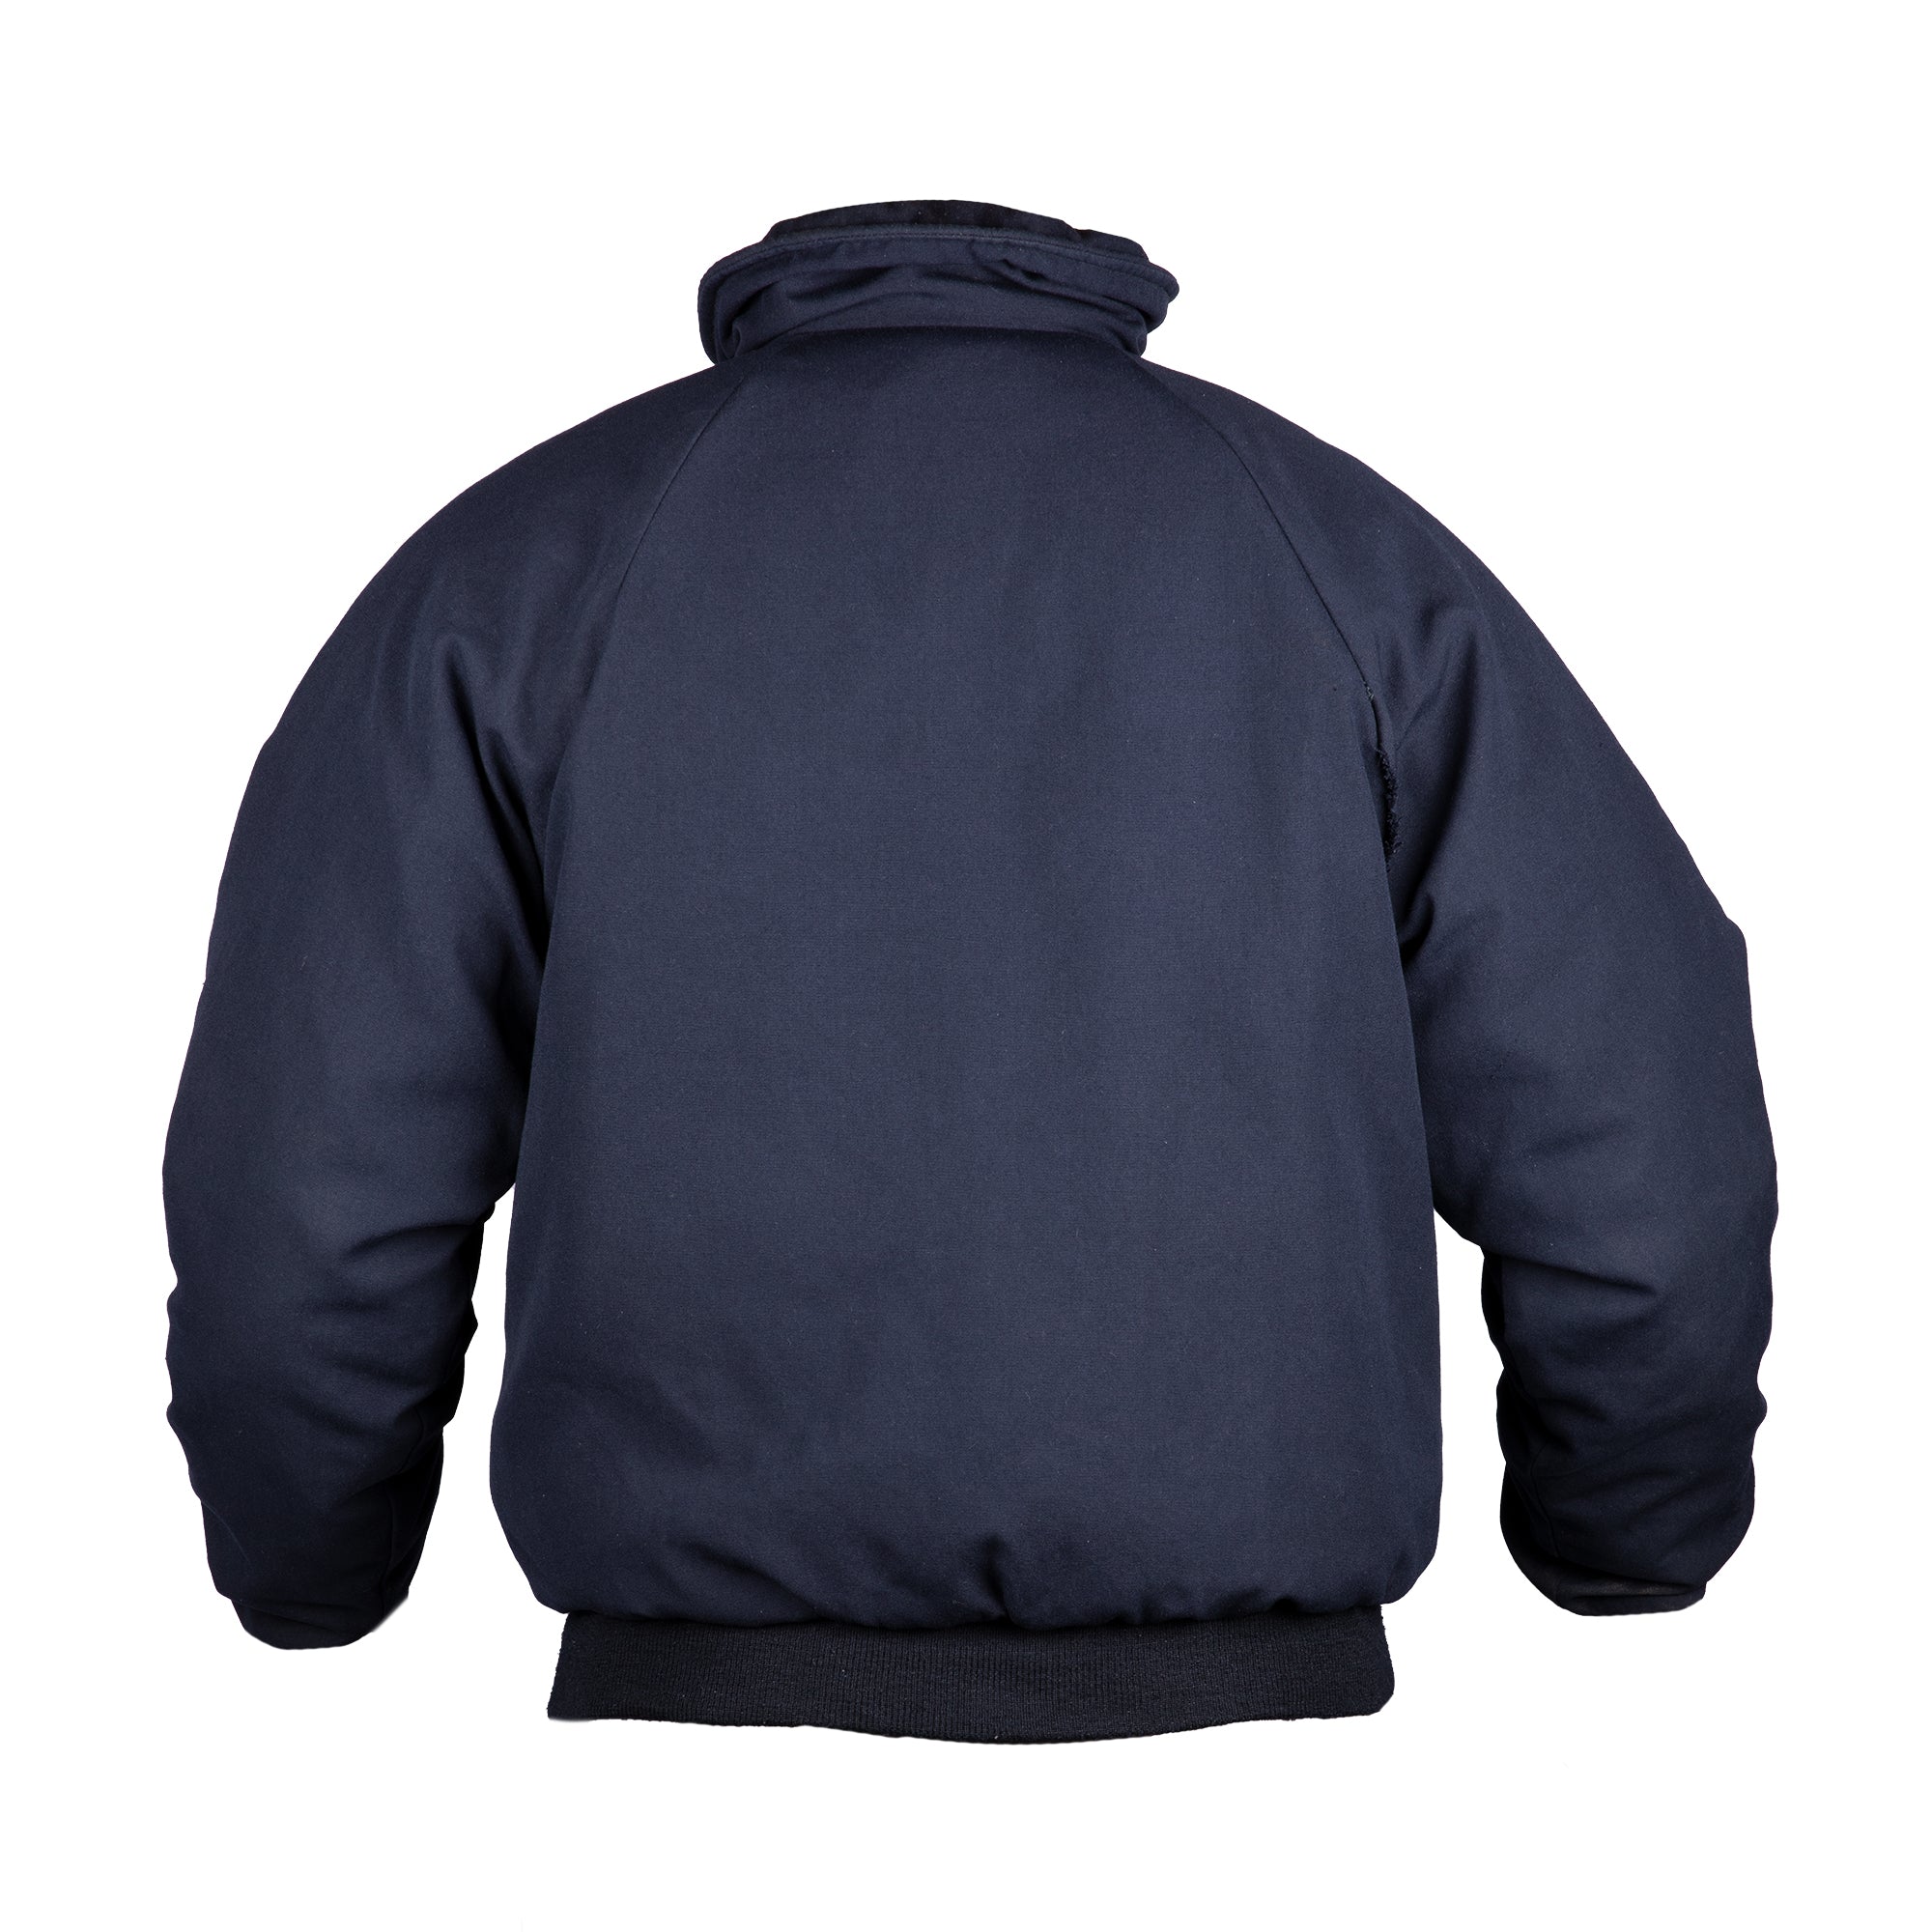 NAVY Shipboard Cold Weather Jacket - Flame Resistant Military Coat 